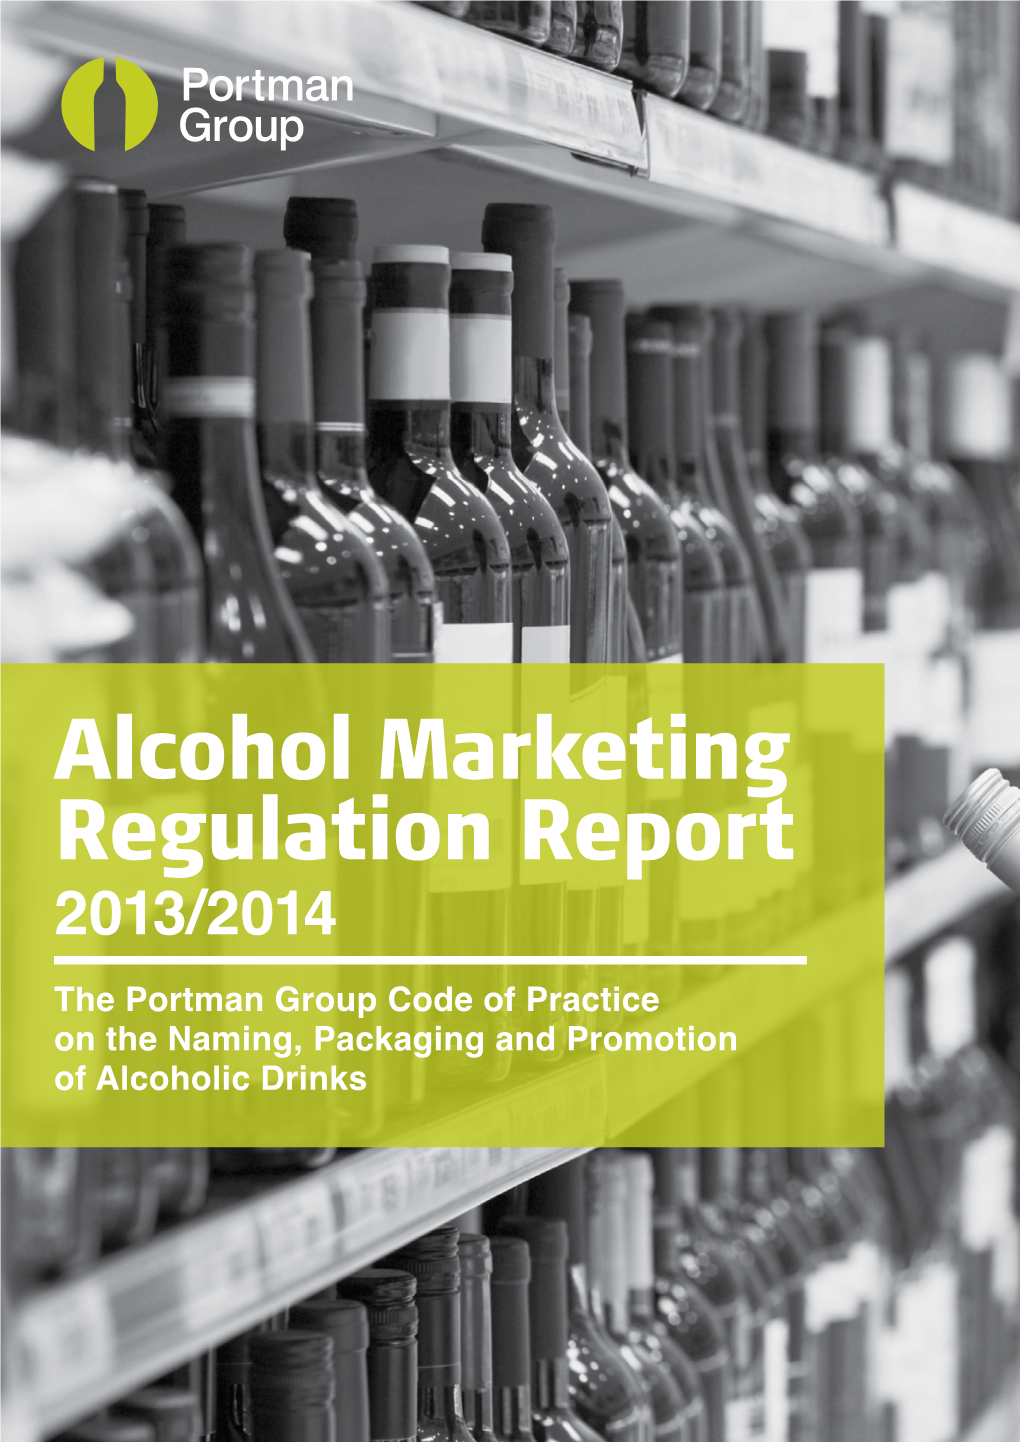 Alcohol Marketing Regulation Report 2013/2014 the Portman Group Code of Practice on the Naming, Packaging and Promotion of Alcoholic Drinks